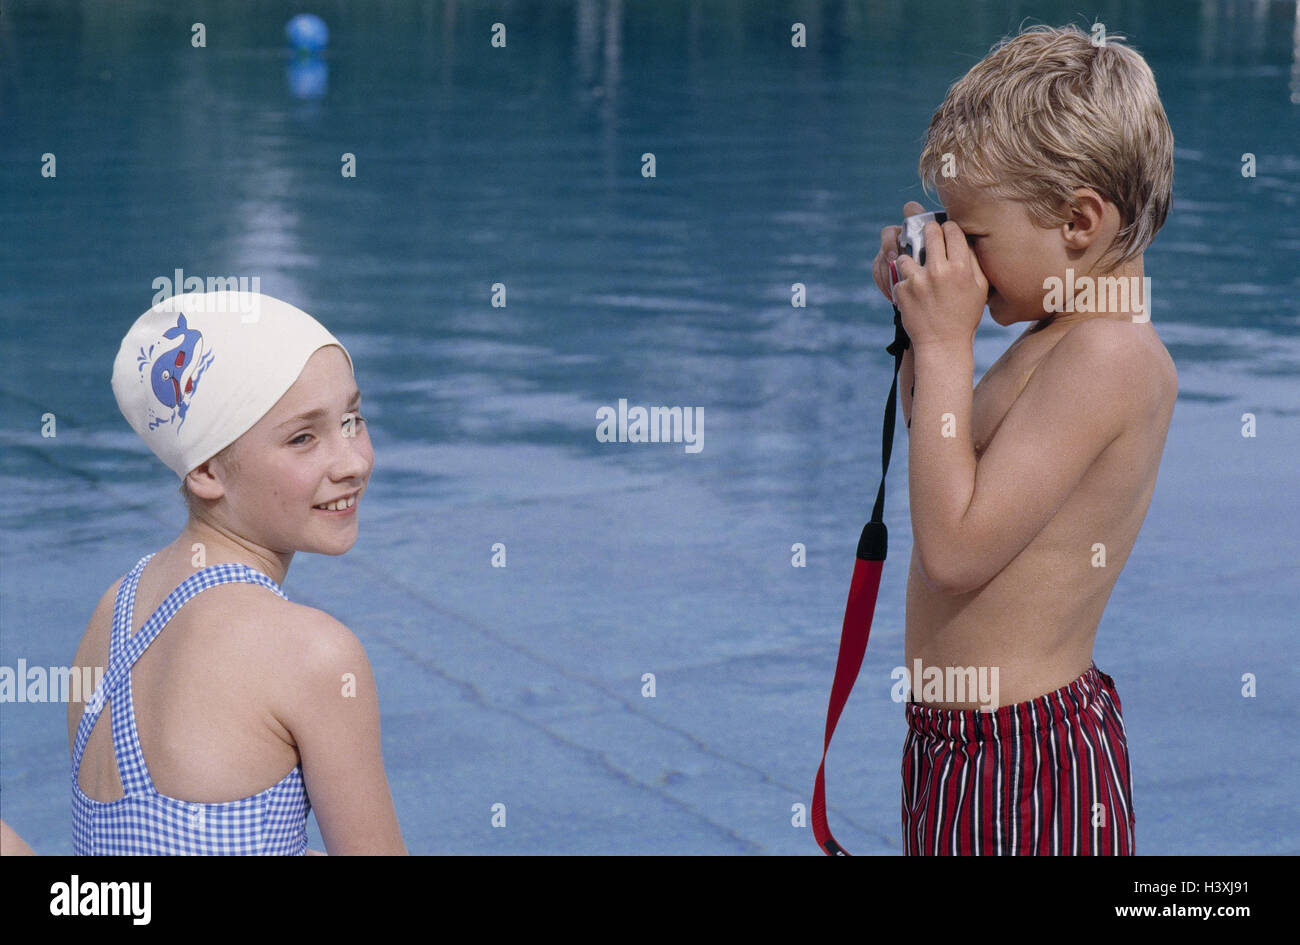 Pool, cymbal margin, girl, sit, boy, take of a photo, detail, model released, outside, swimming-pool, swimming pool, swimming pool, summer, leisure time, holidays, outdoor swimming pool, siblings, swimming cap, camera, photo camera, camera, side view Stock Photo